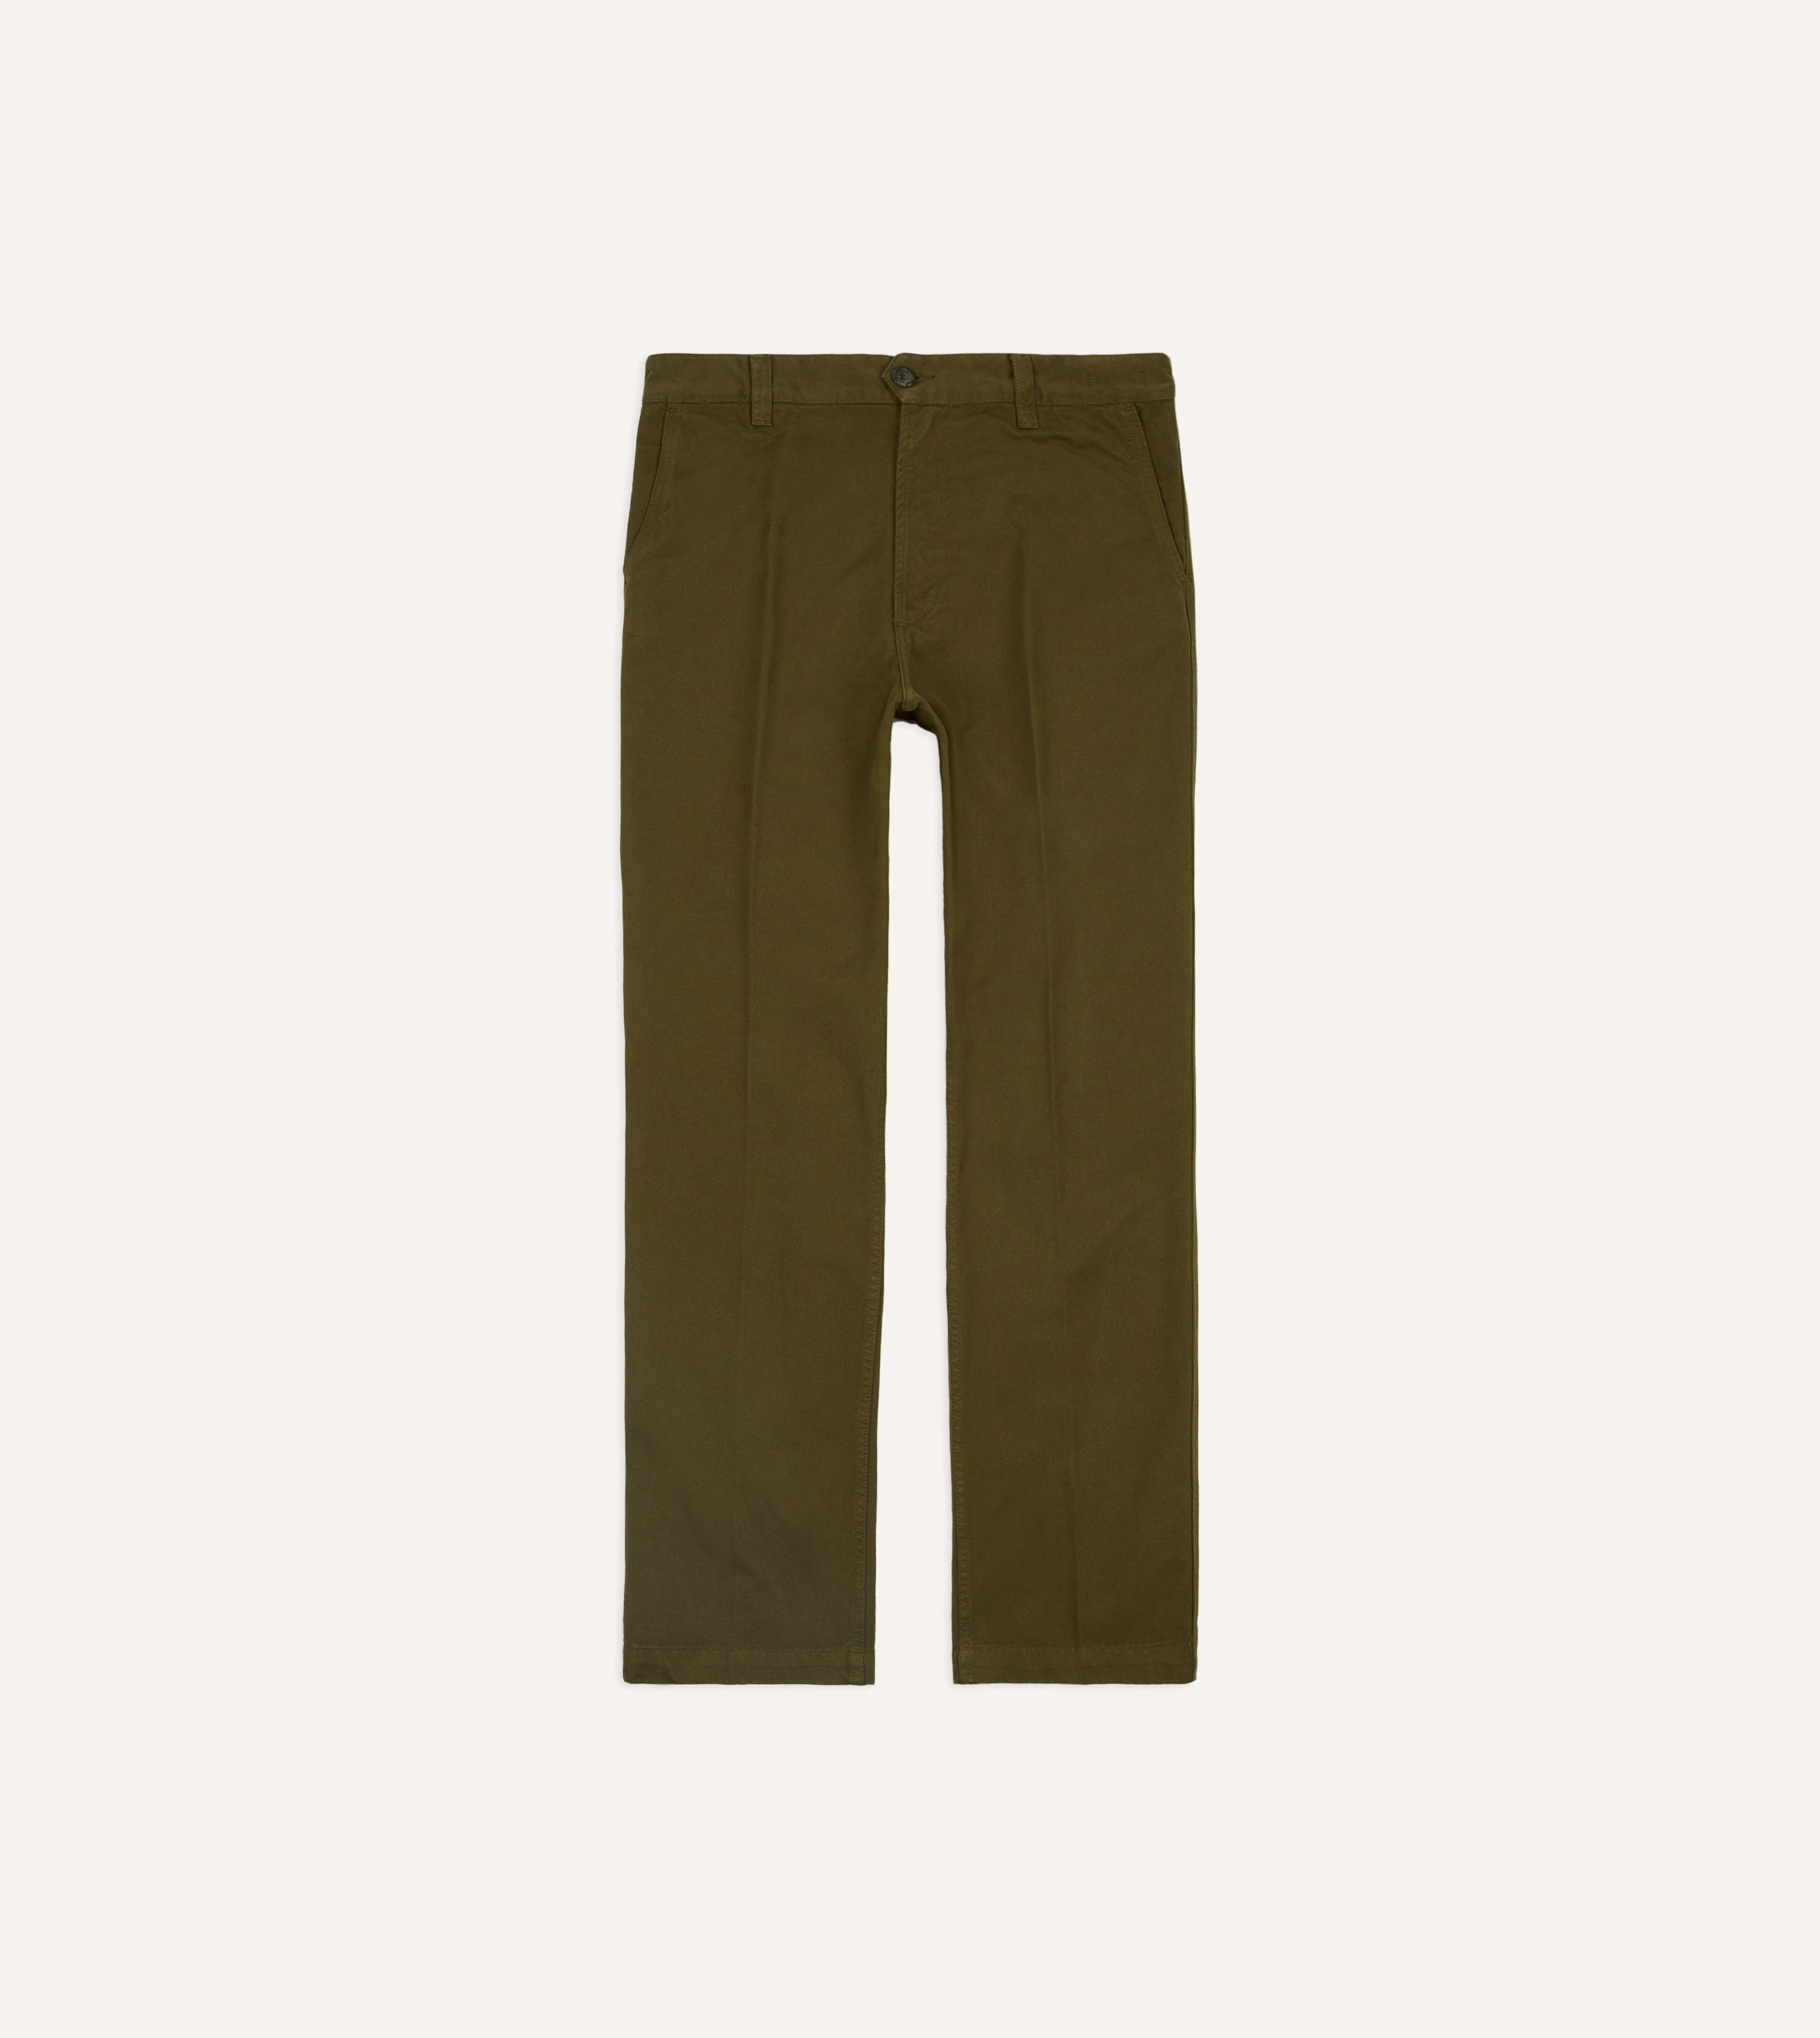 Olive Textured Cotton Flat Front Chino